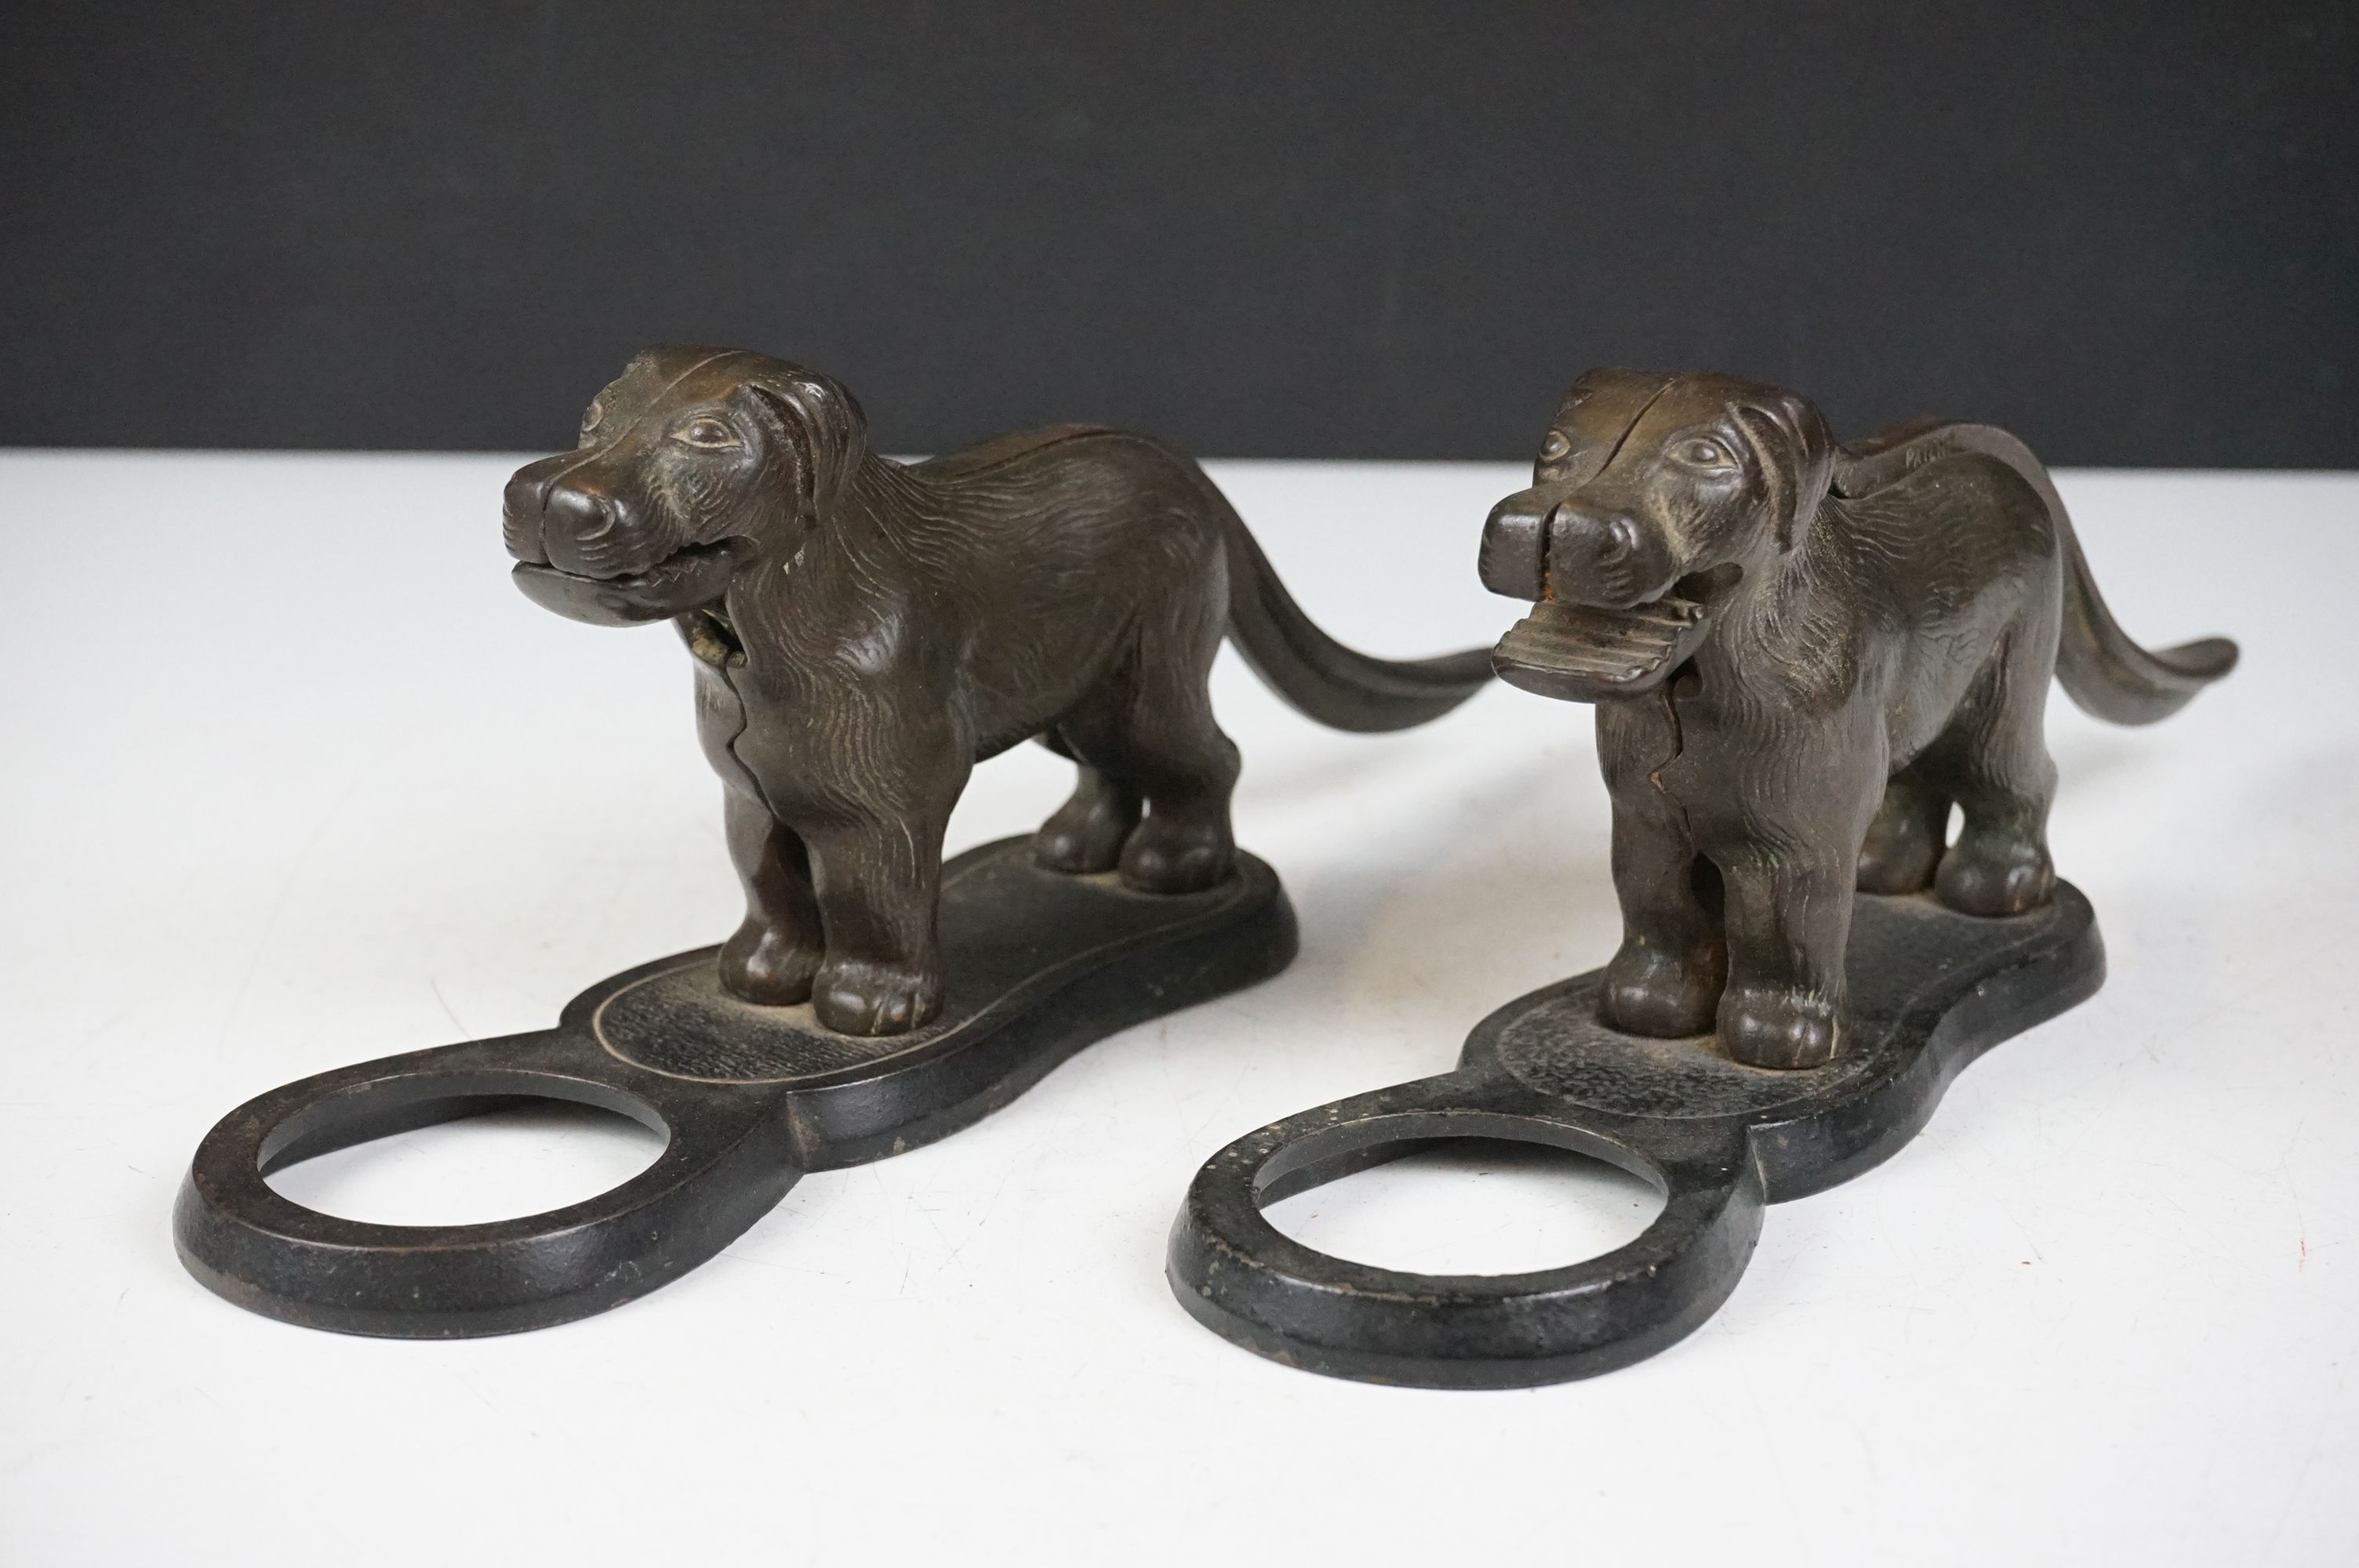 Pair of early 20th Century cast iron nut crackers in the from of dogs with mechanical tails and